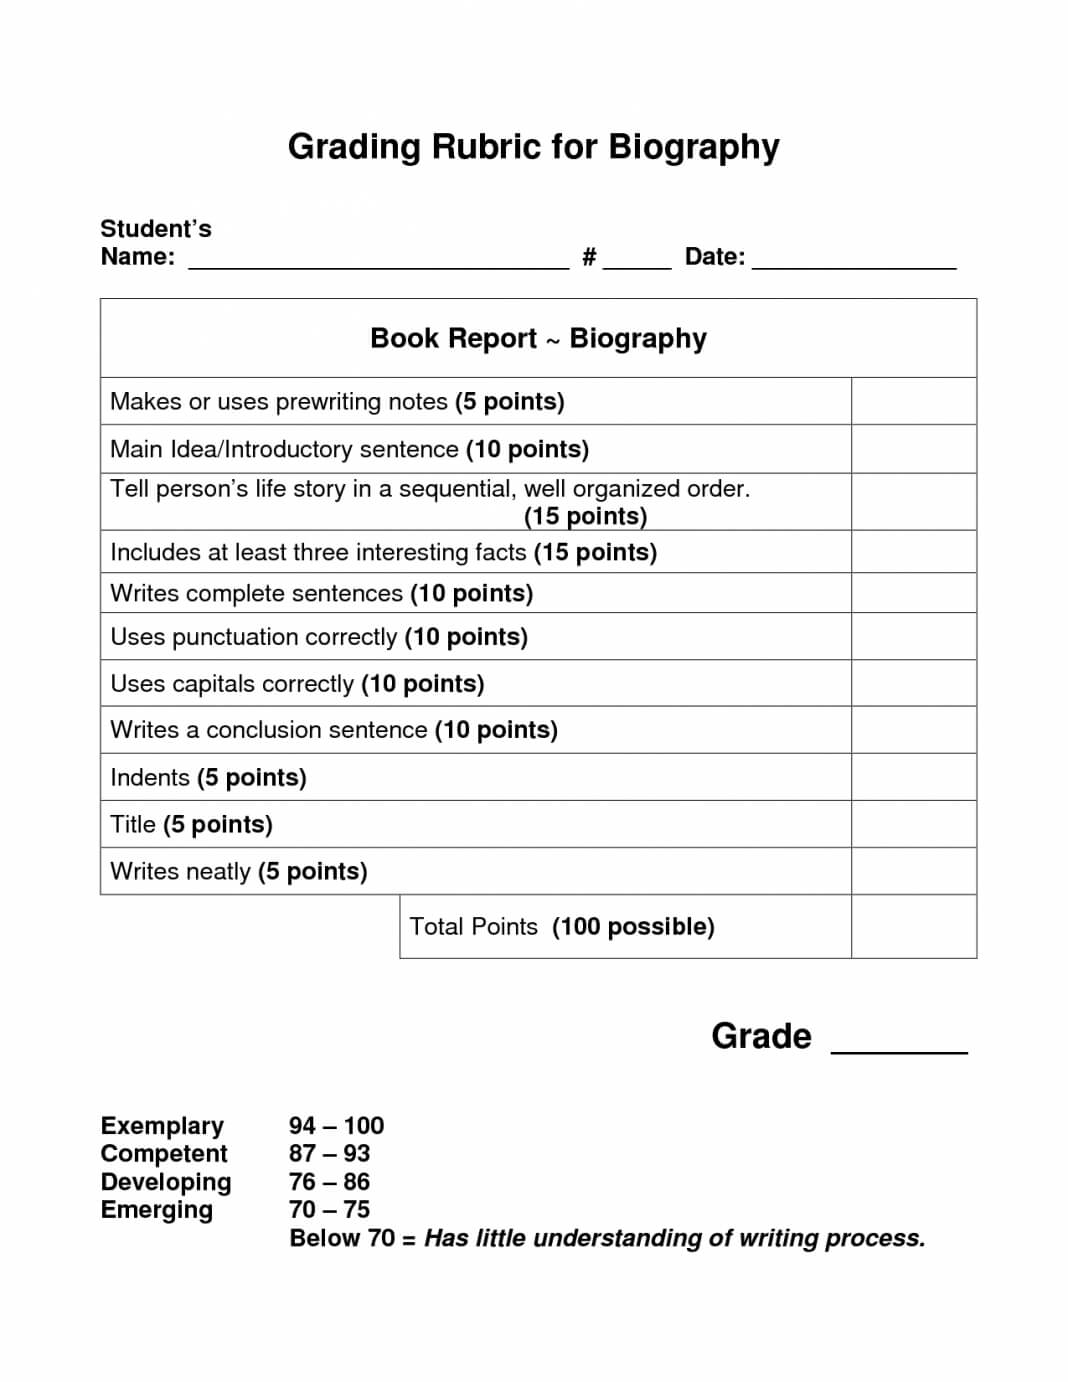 Englishlinx Com Book Report Worksheets Examples My Fun Inside Biography Book Report Template